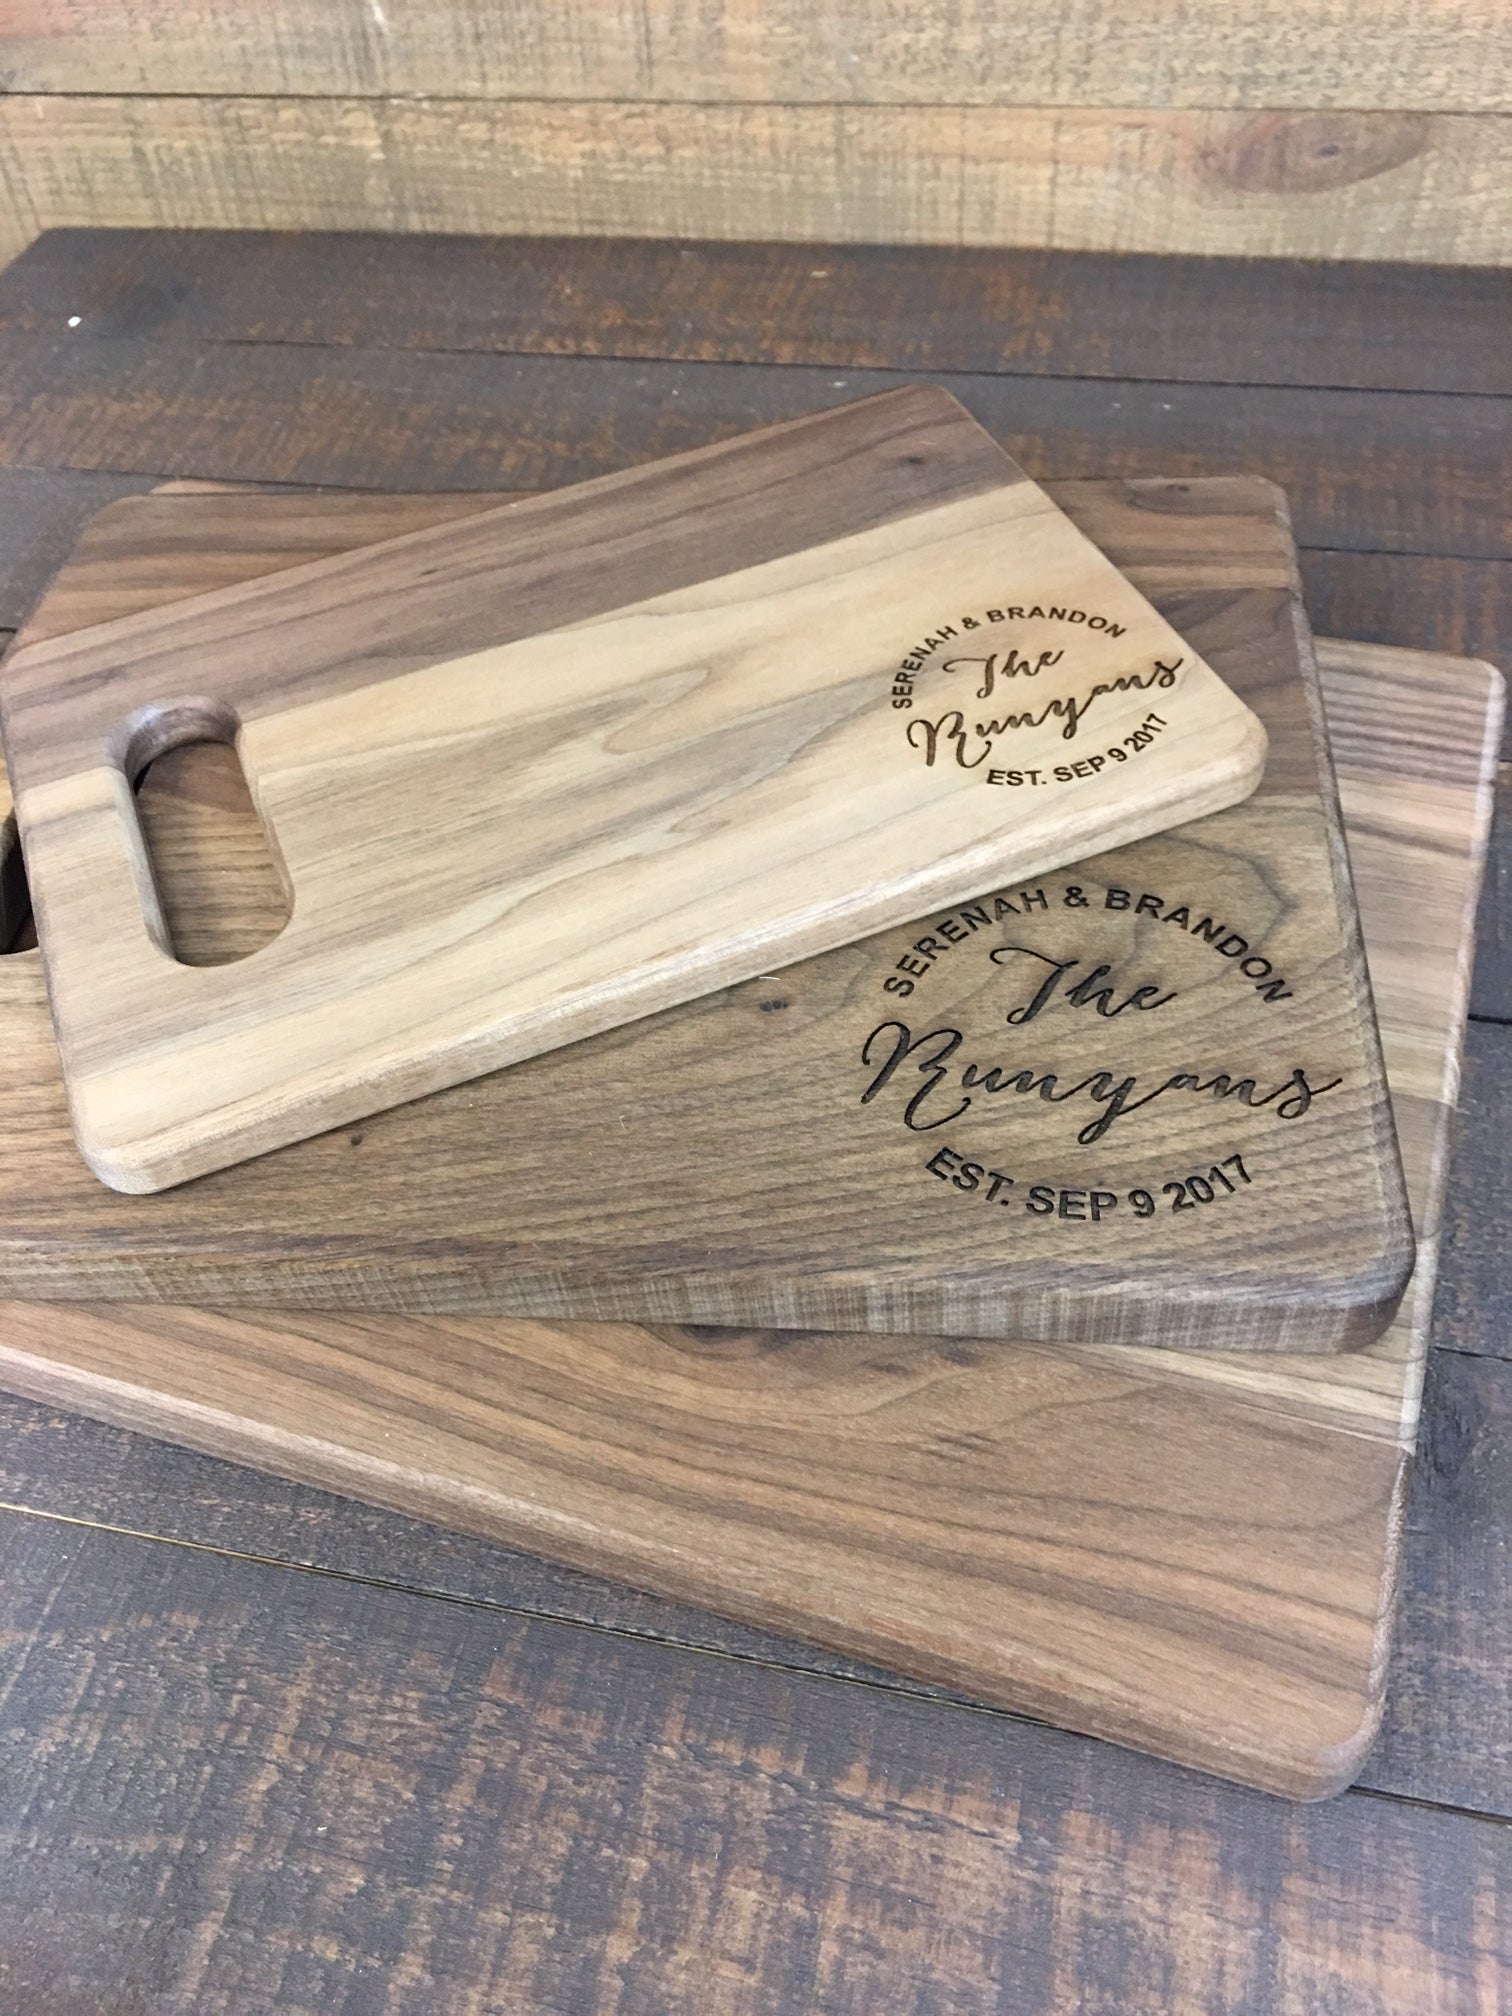 Customized Gifts for Him - Personalised Wooden Kitchenware and